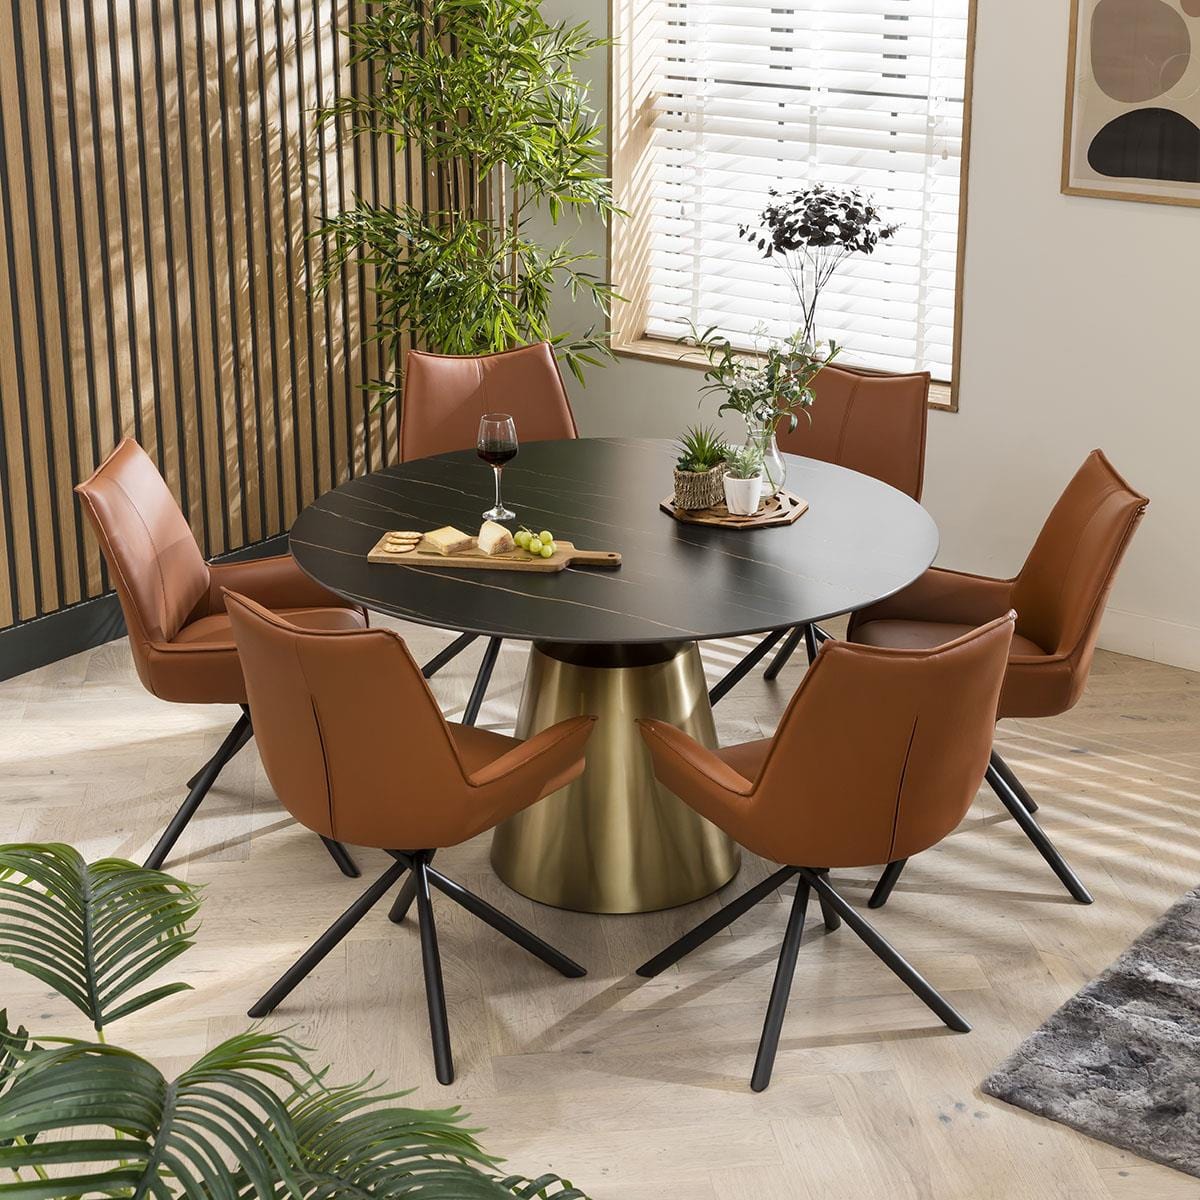 Quatropi Round Ceramic Marble-Effect Dining Table And Chairs - 6 Person Set - Black